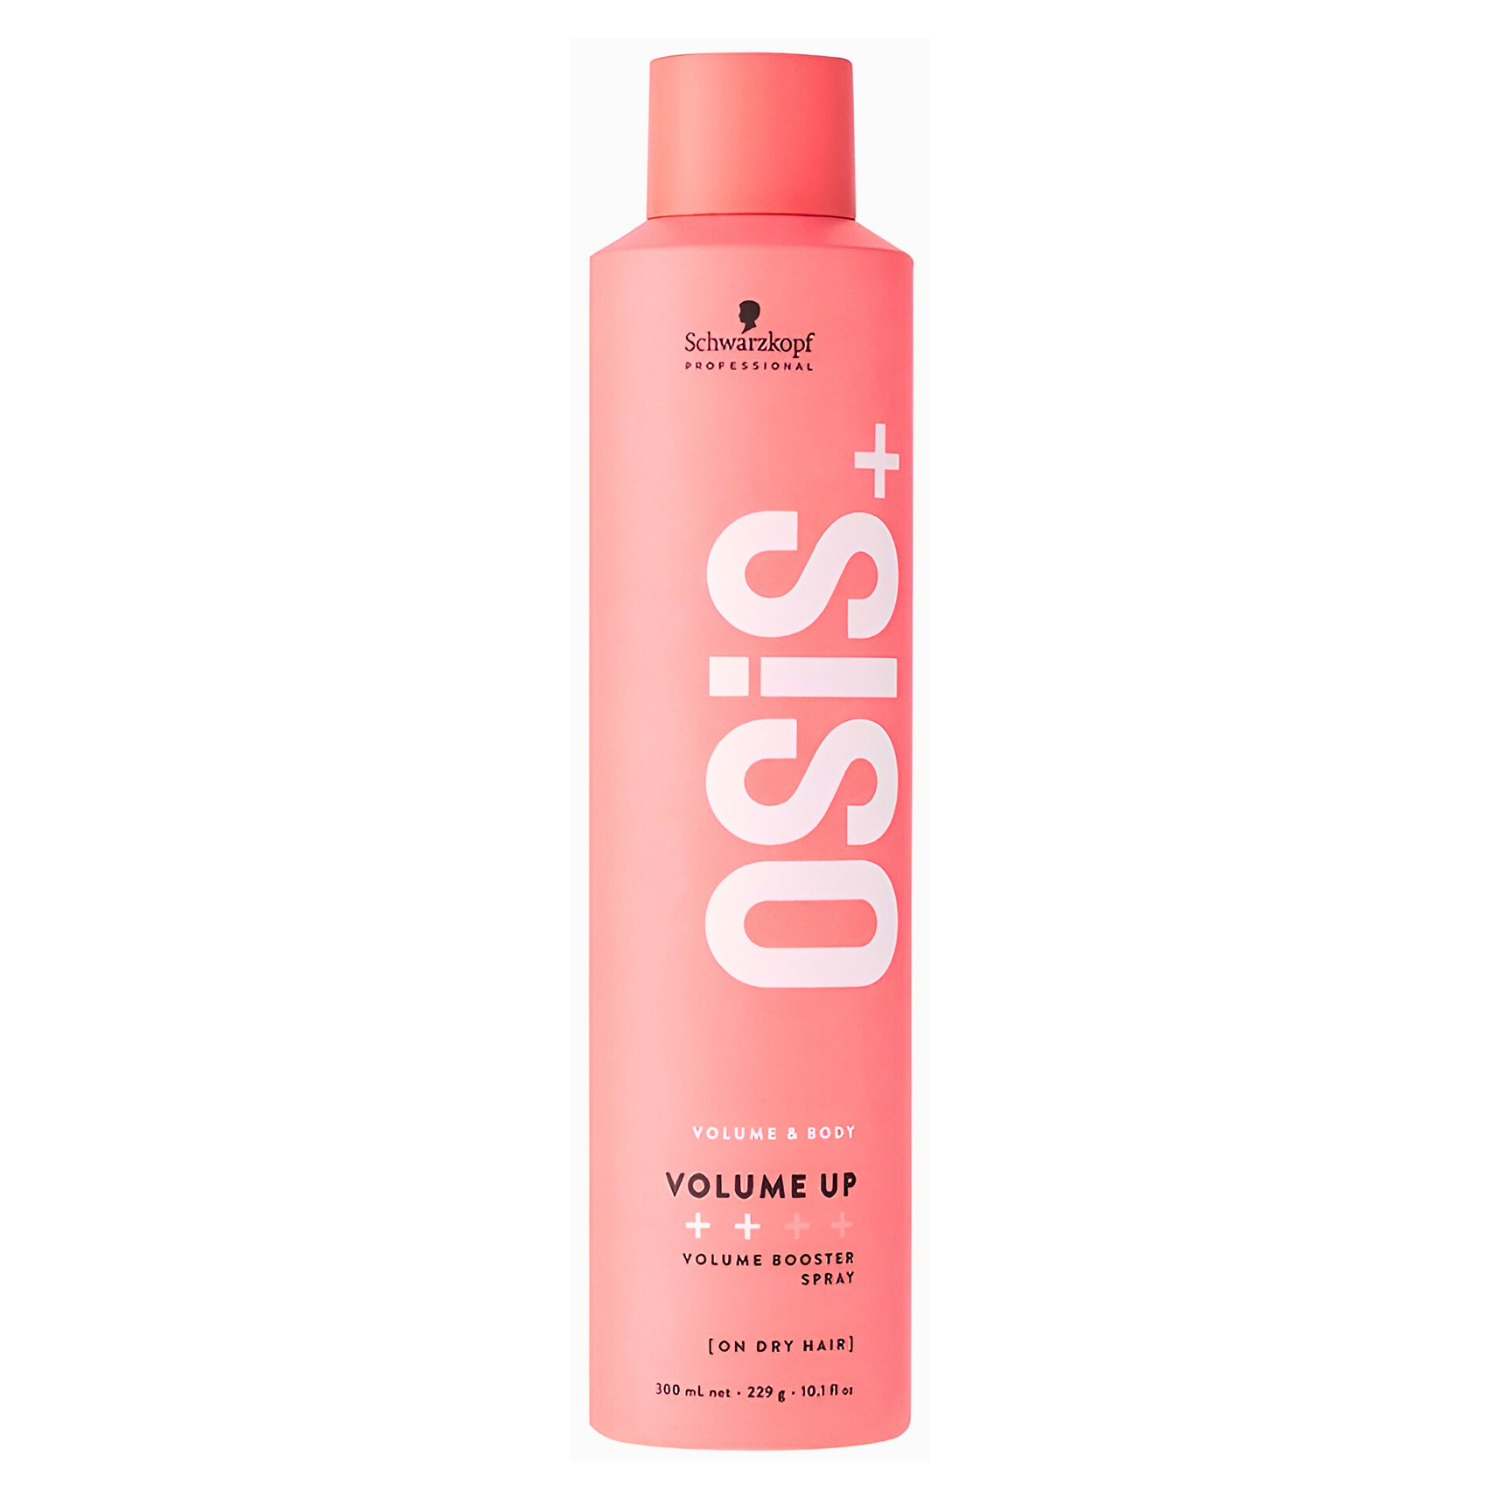 OSIS Volume Up Booster Spray